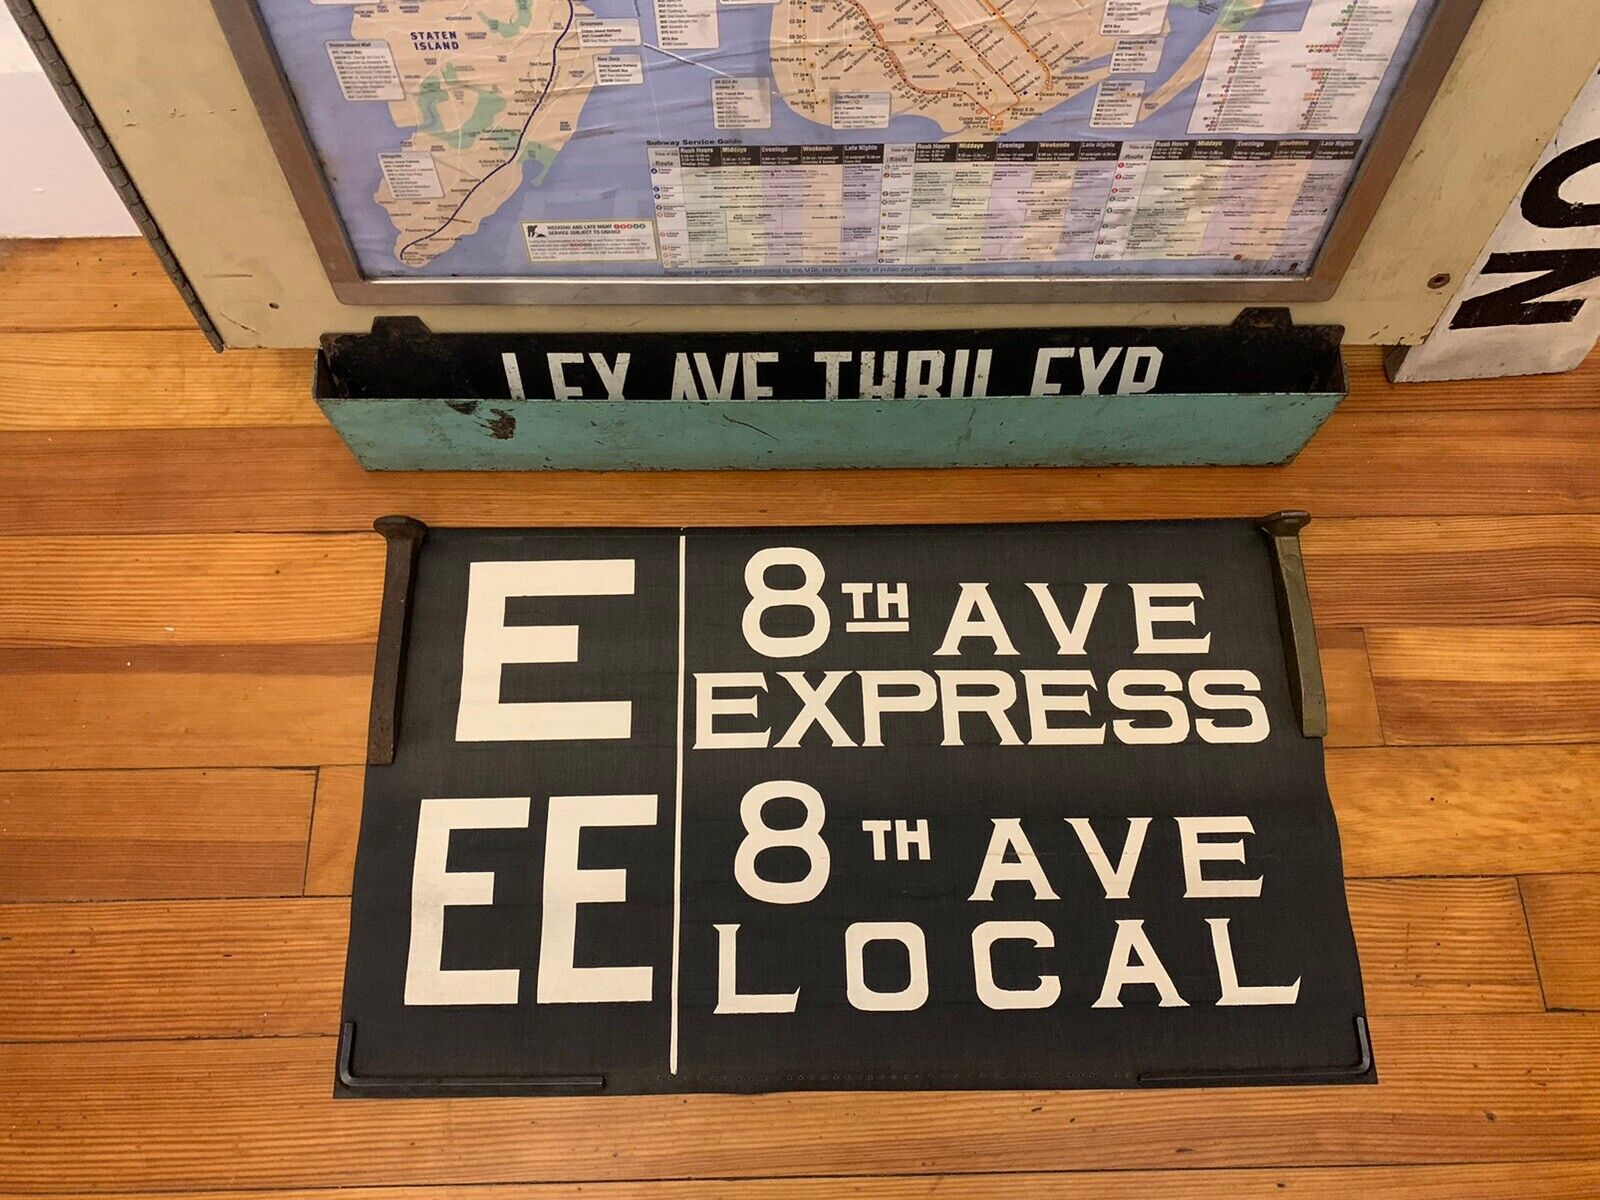 VINTAGE NY NYC SUBWAY ROLL SIGN R1/9 COLLECTIBLE E EE 8TH AVENUE EXPRESS LOCAL